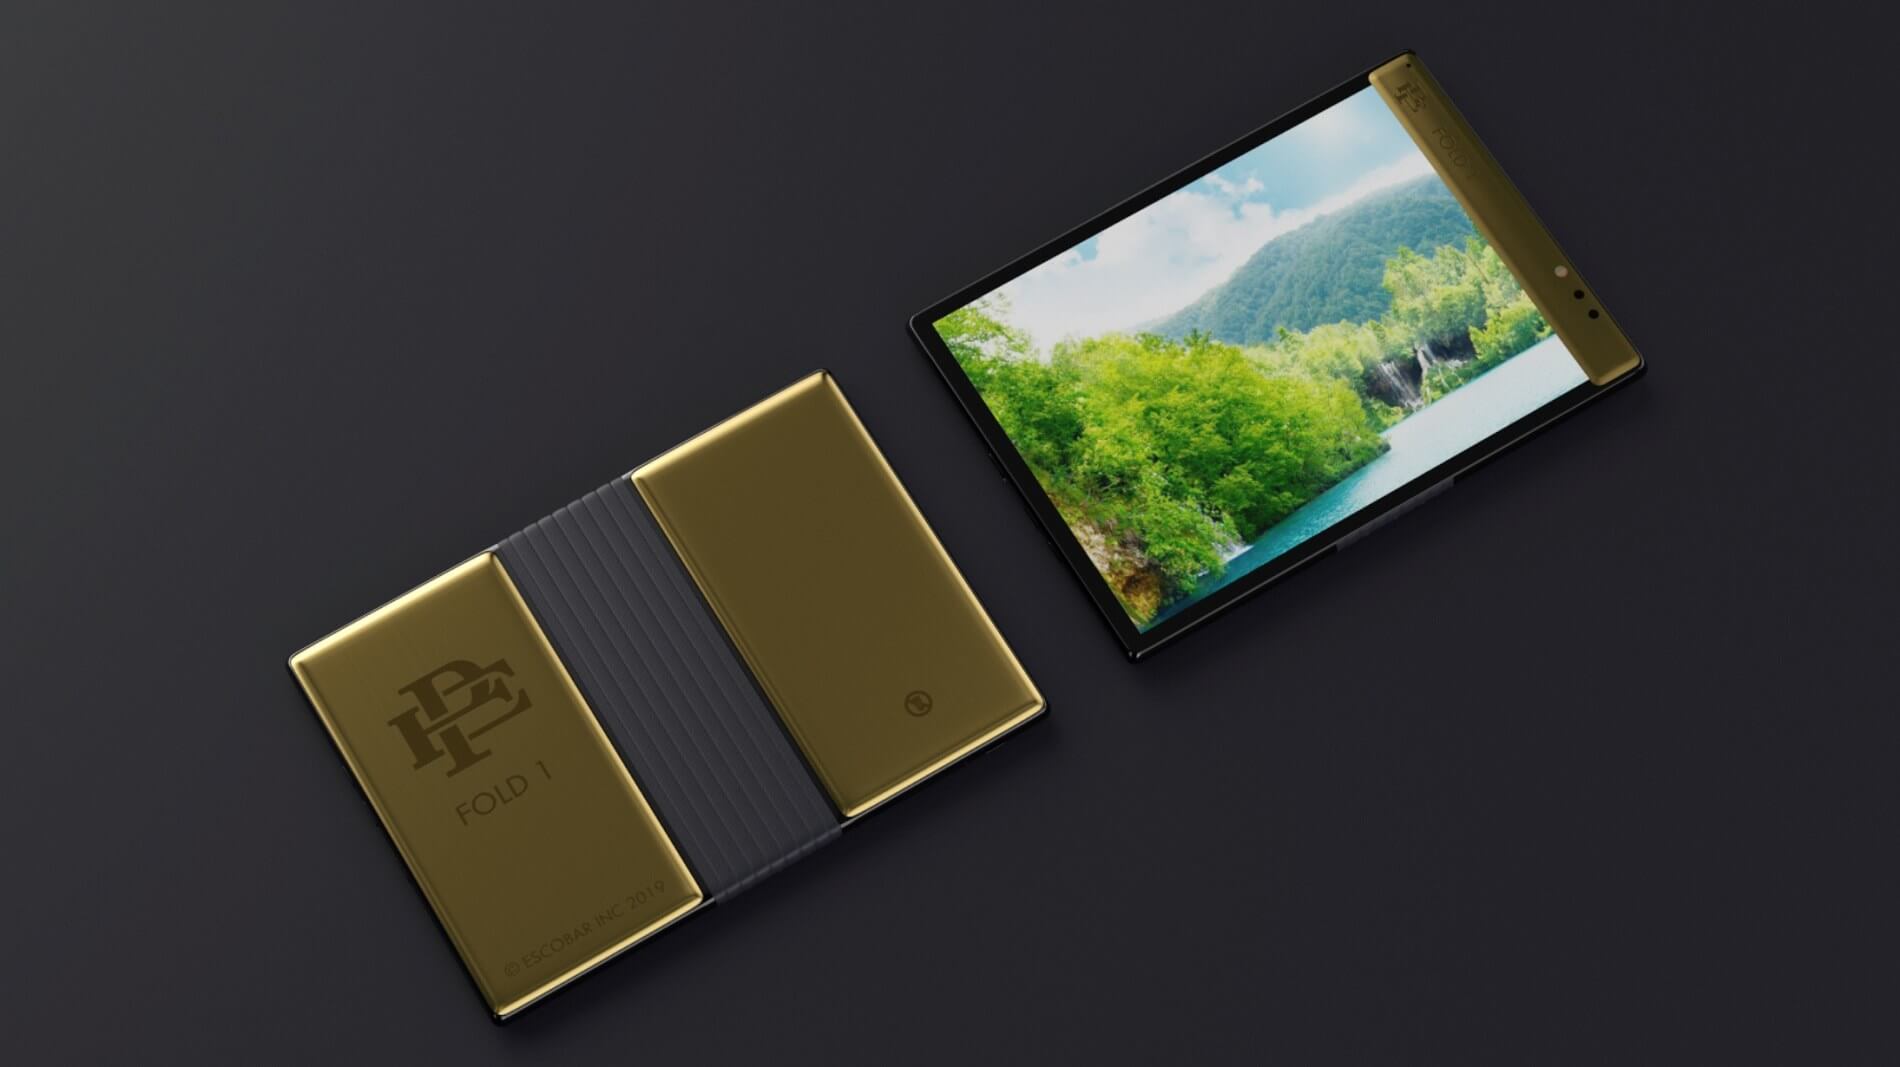 Pablo Escobar's brother launches a $349 folding phone